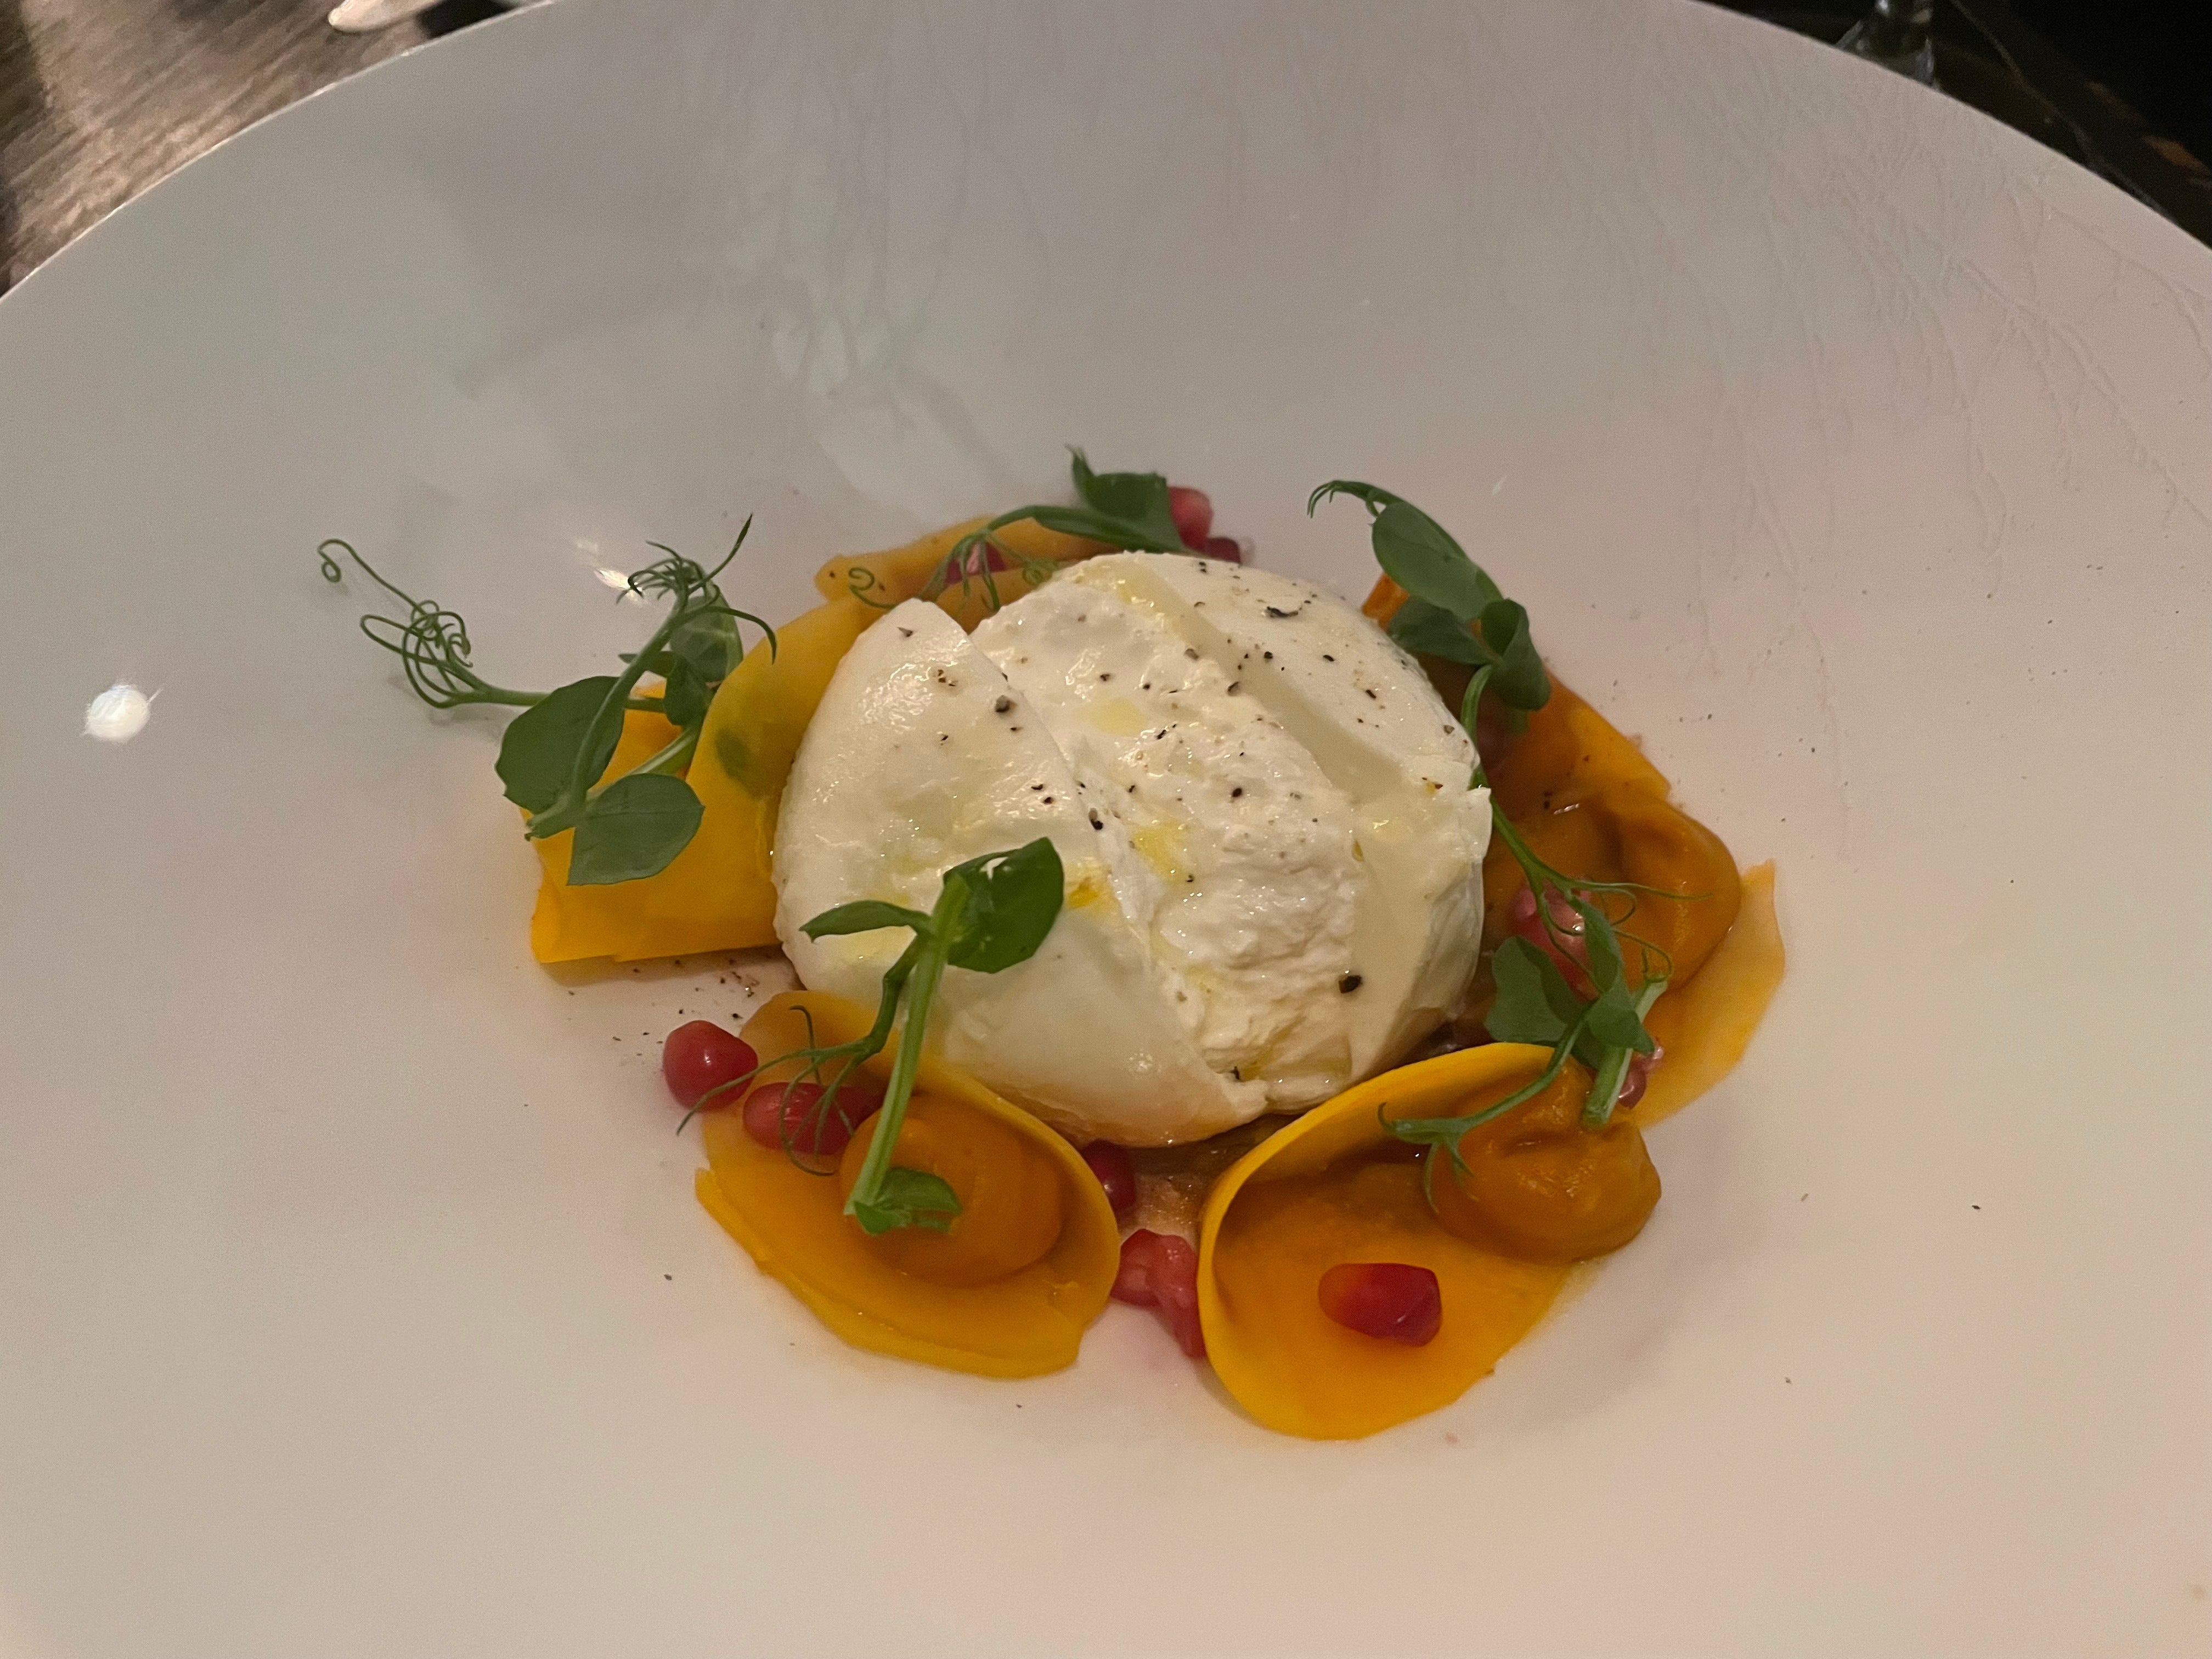 A burrata and tomato salad catches our eye, a combination that can do no wrong, if you don’t think about the carbon footprint of burrata for too long